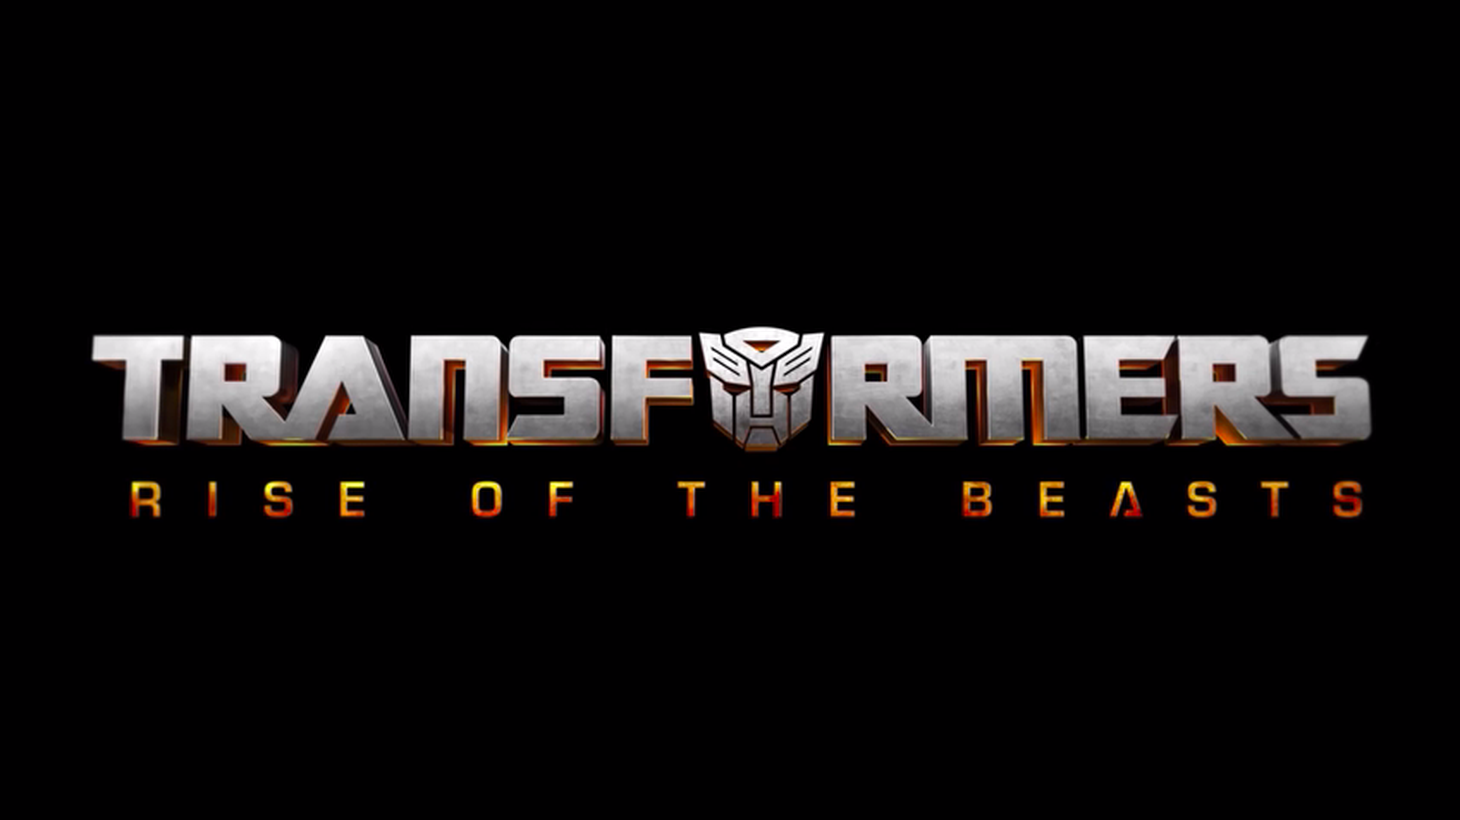 In the latest “Transformers” installment, Optimus Prime and the Autobots team up with the Maximals to fight a new threat that could destroy Earth.